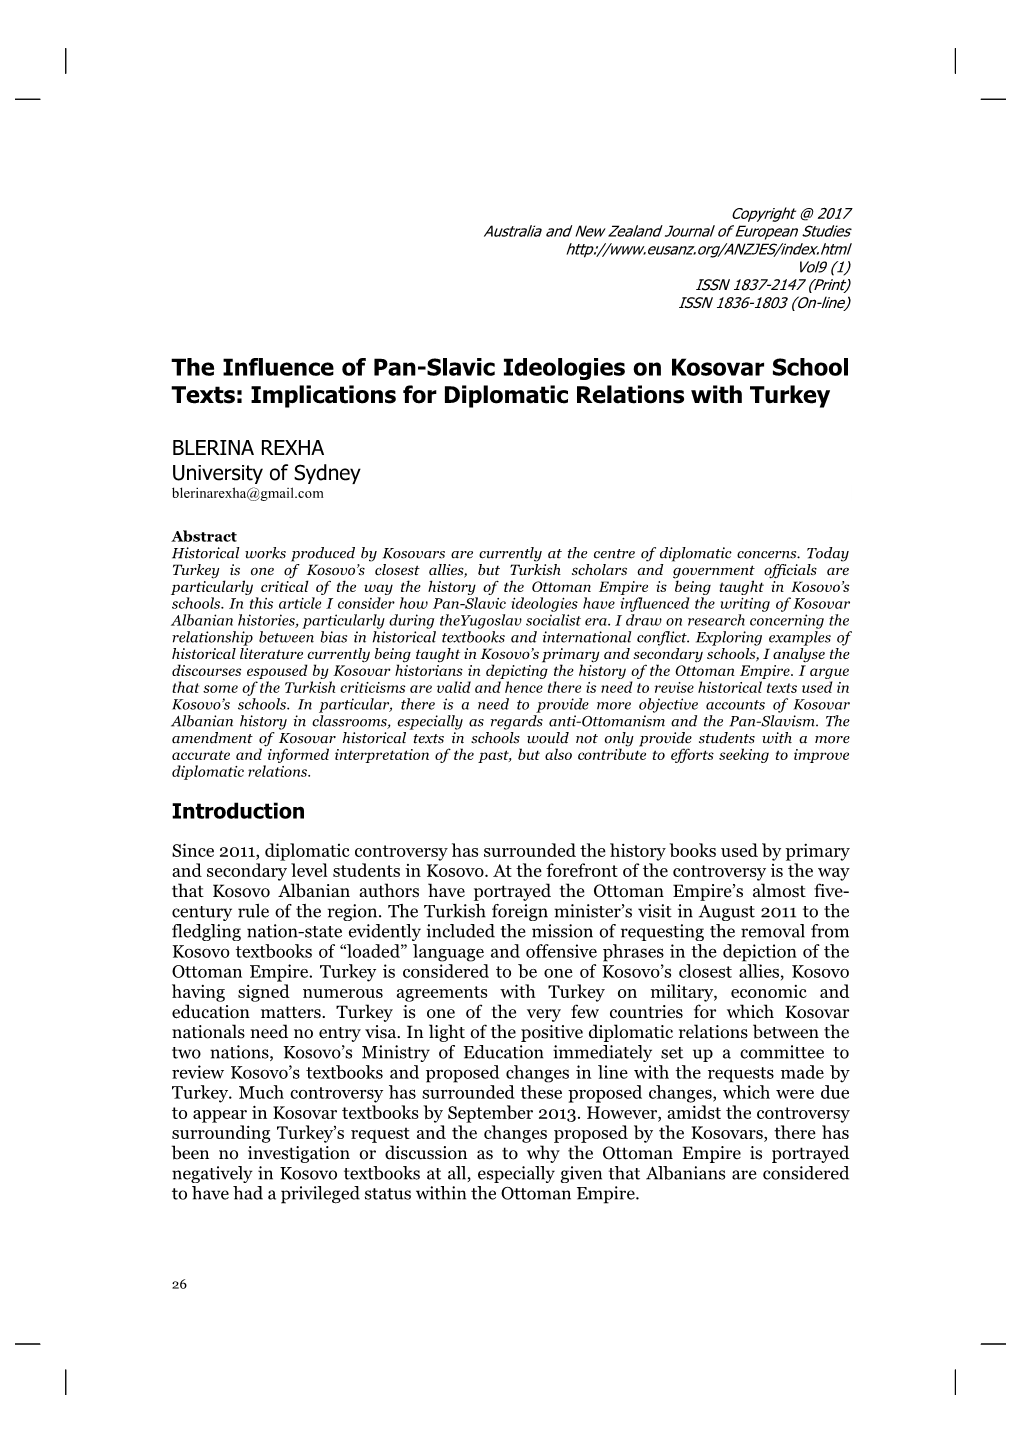 The Influence of Pan-Slavic Ideologies on Kosovar School Texts: Implications for Diplomatic Relations with Turkey